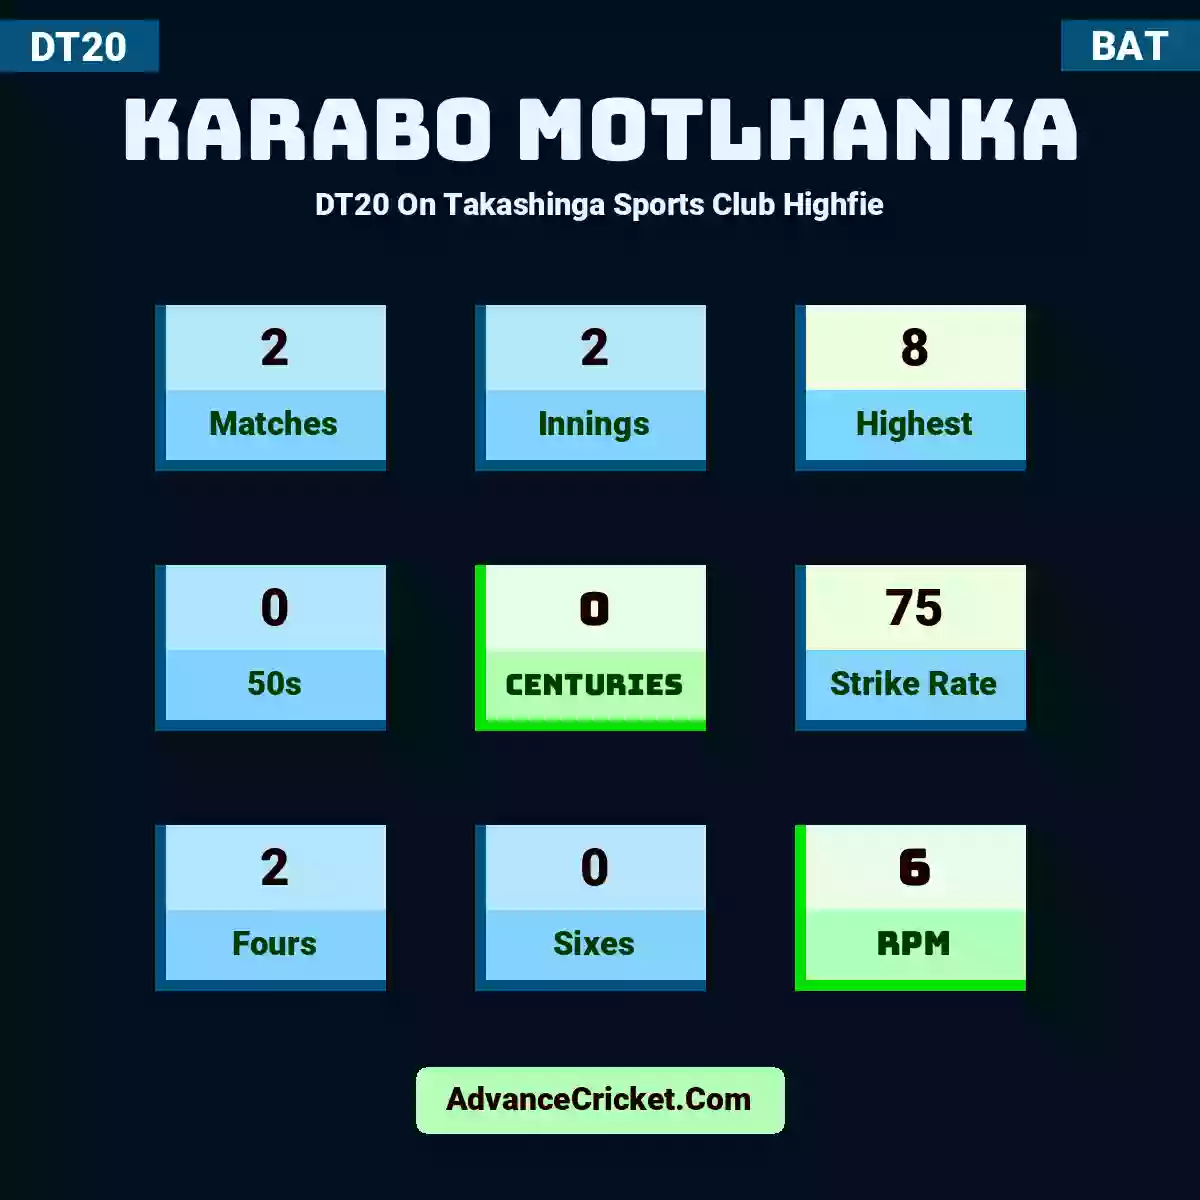 Karabo Motlhanka DT20  On Takashinga Sports Club Highfie, Karabo Motlhanka played 2 matches, scored 8 runs as highest, 0 half-centuries, and 0 centuries, with a strike rate of 75. K.Motlhanka hit 2 fours and 0 sixes, with an RPM of 6.